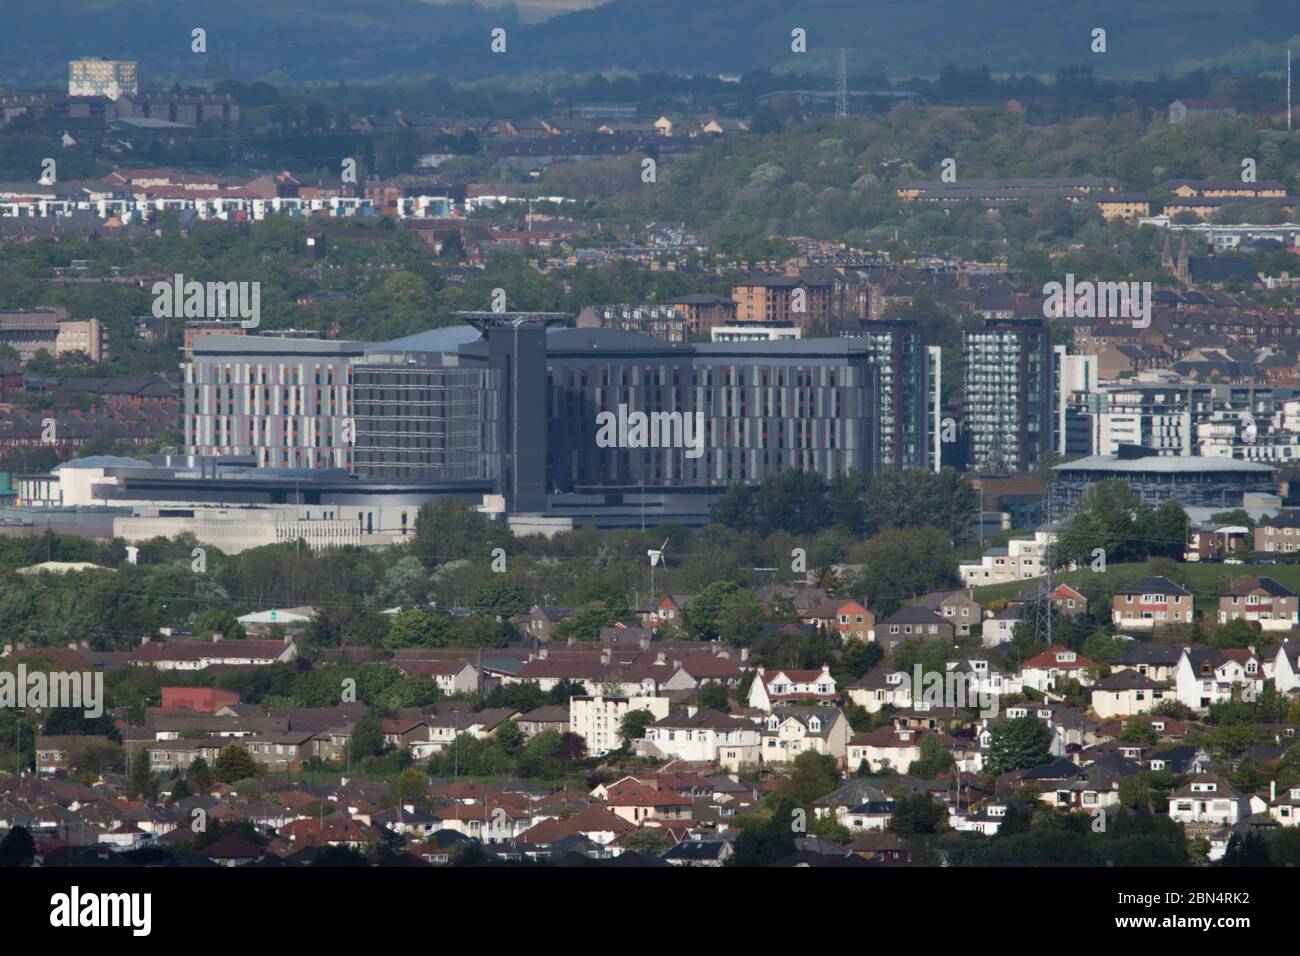 Glasgow, Scotland, UK. 12th May, 2020. Pictured: Telephoto view of the Queen Elizabeth University Hospital (QEUH) which is run by NHS Greater Glasgow and Clyde health board. The Scottish Government are under pressure to release information on hospital acquired COVID19 at the QEUH. In Scotland to date, a total of 75,570 people have been tested, with 13,763 people testing positive and 1,912 deaths. Credit: Colin Fisher/Alamy Live News Stock Photo